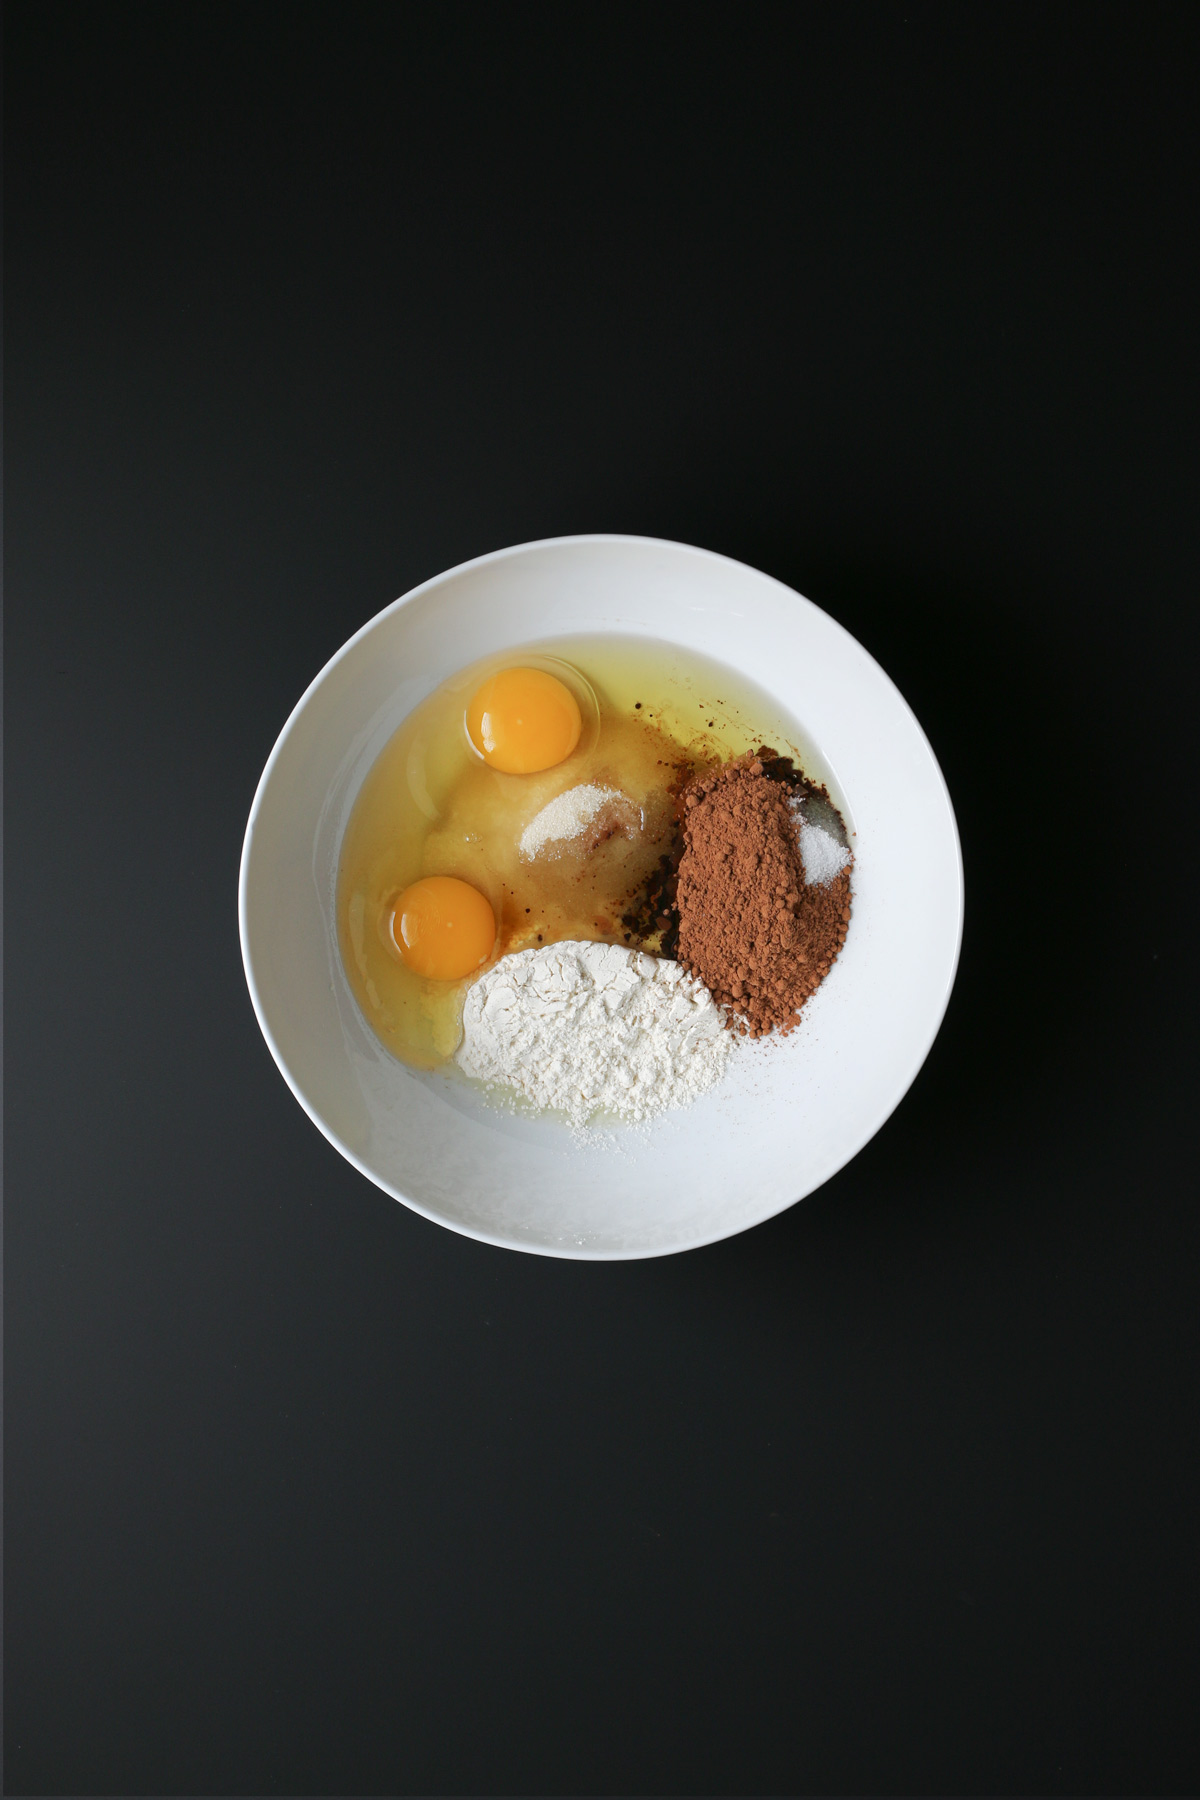 brownie ingredients in a white bowl on a black table.